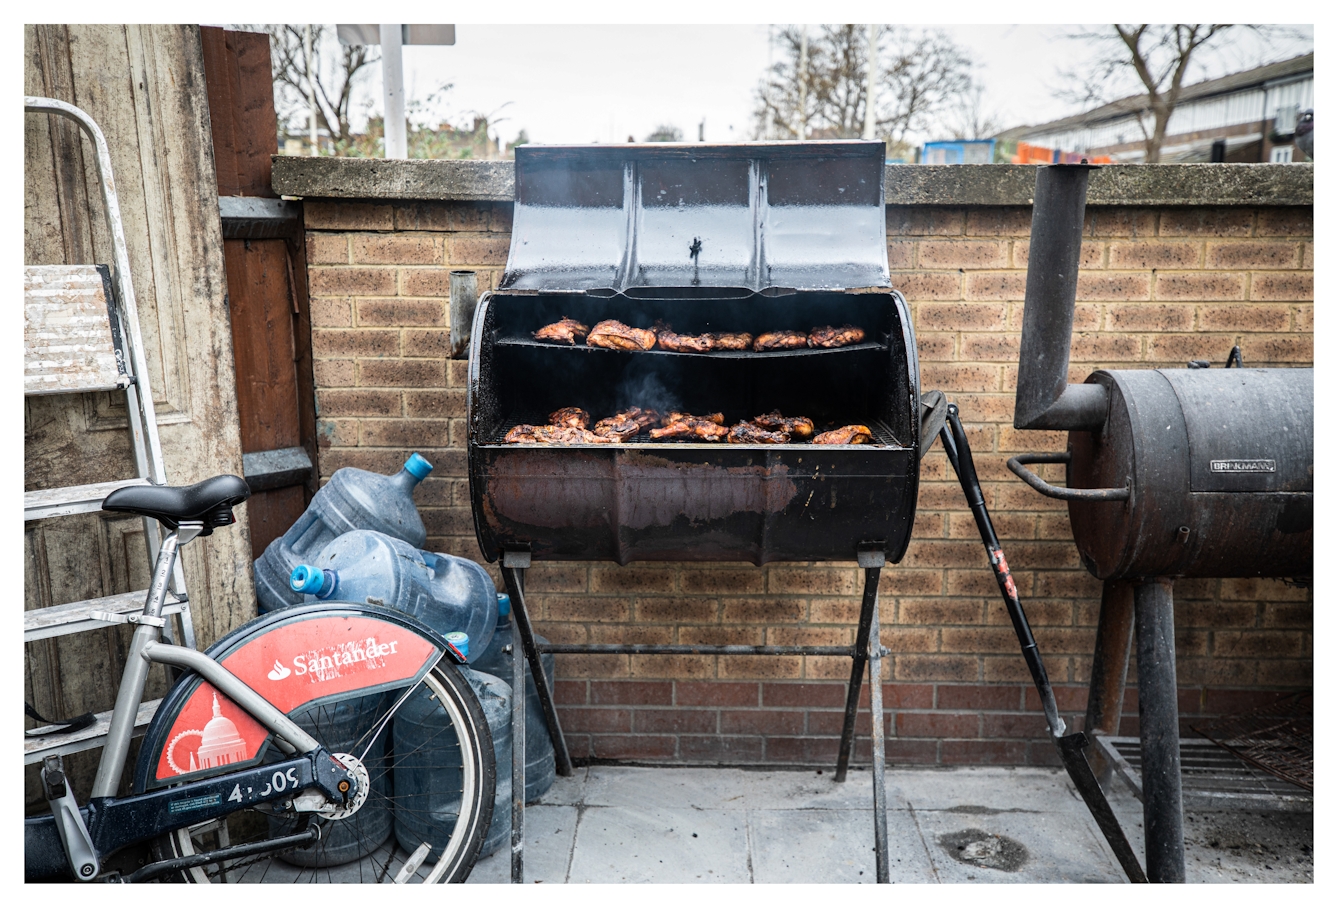 Photograph of an outdoor yard setting with paving slabs and a brick wall. In front of the brick wall are 2 large oil drum cookers, one of which has its lid open revealing the rows of chicken meat cooking inside. To the left is a bicycle and a ladder.